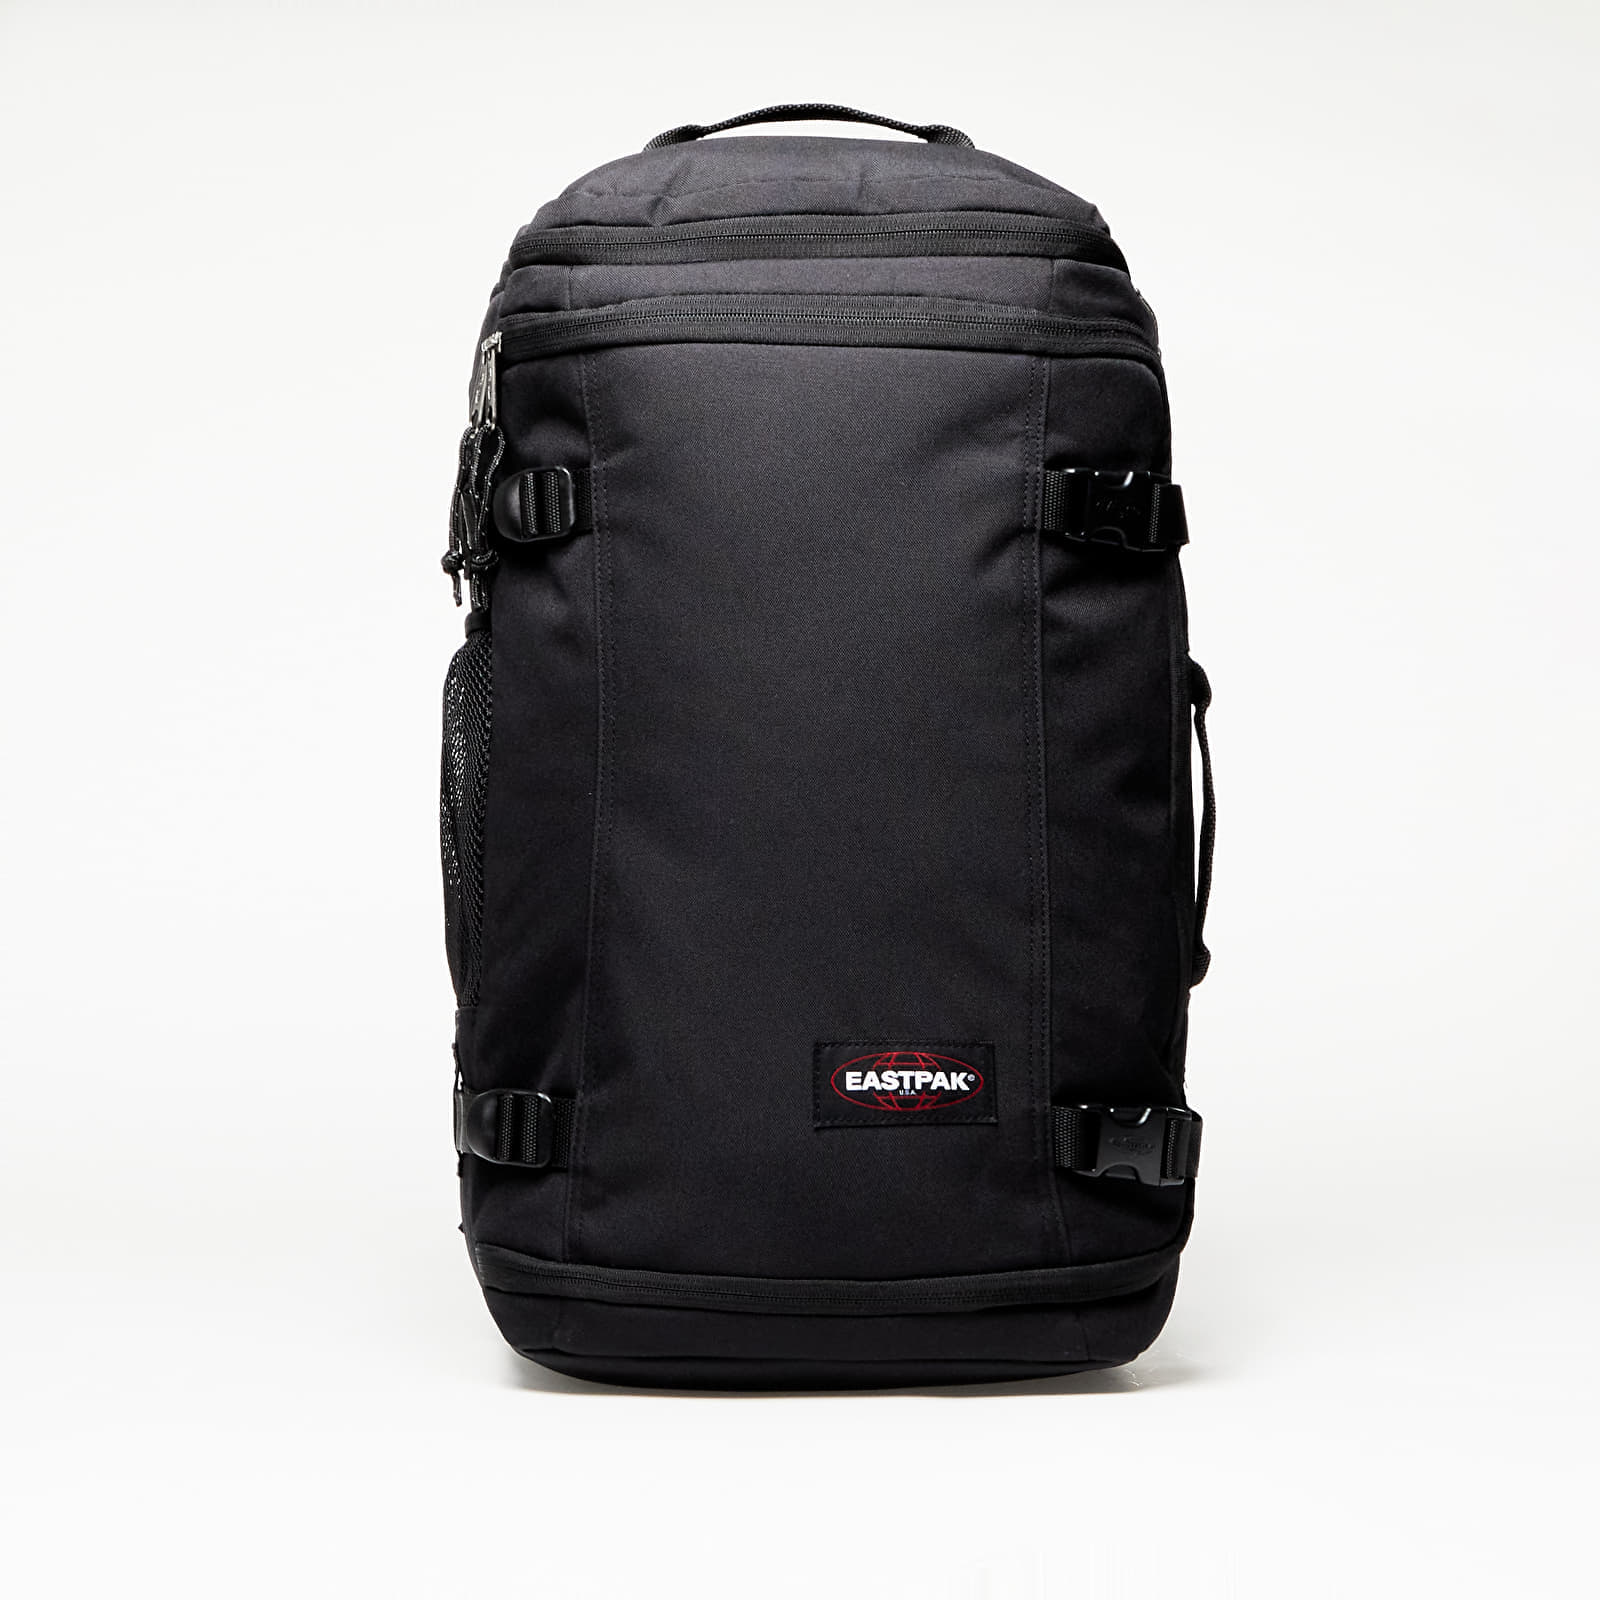 Раници Eastpak Carry Bagage Cabine Backpack Black